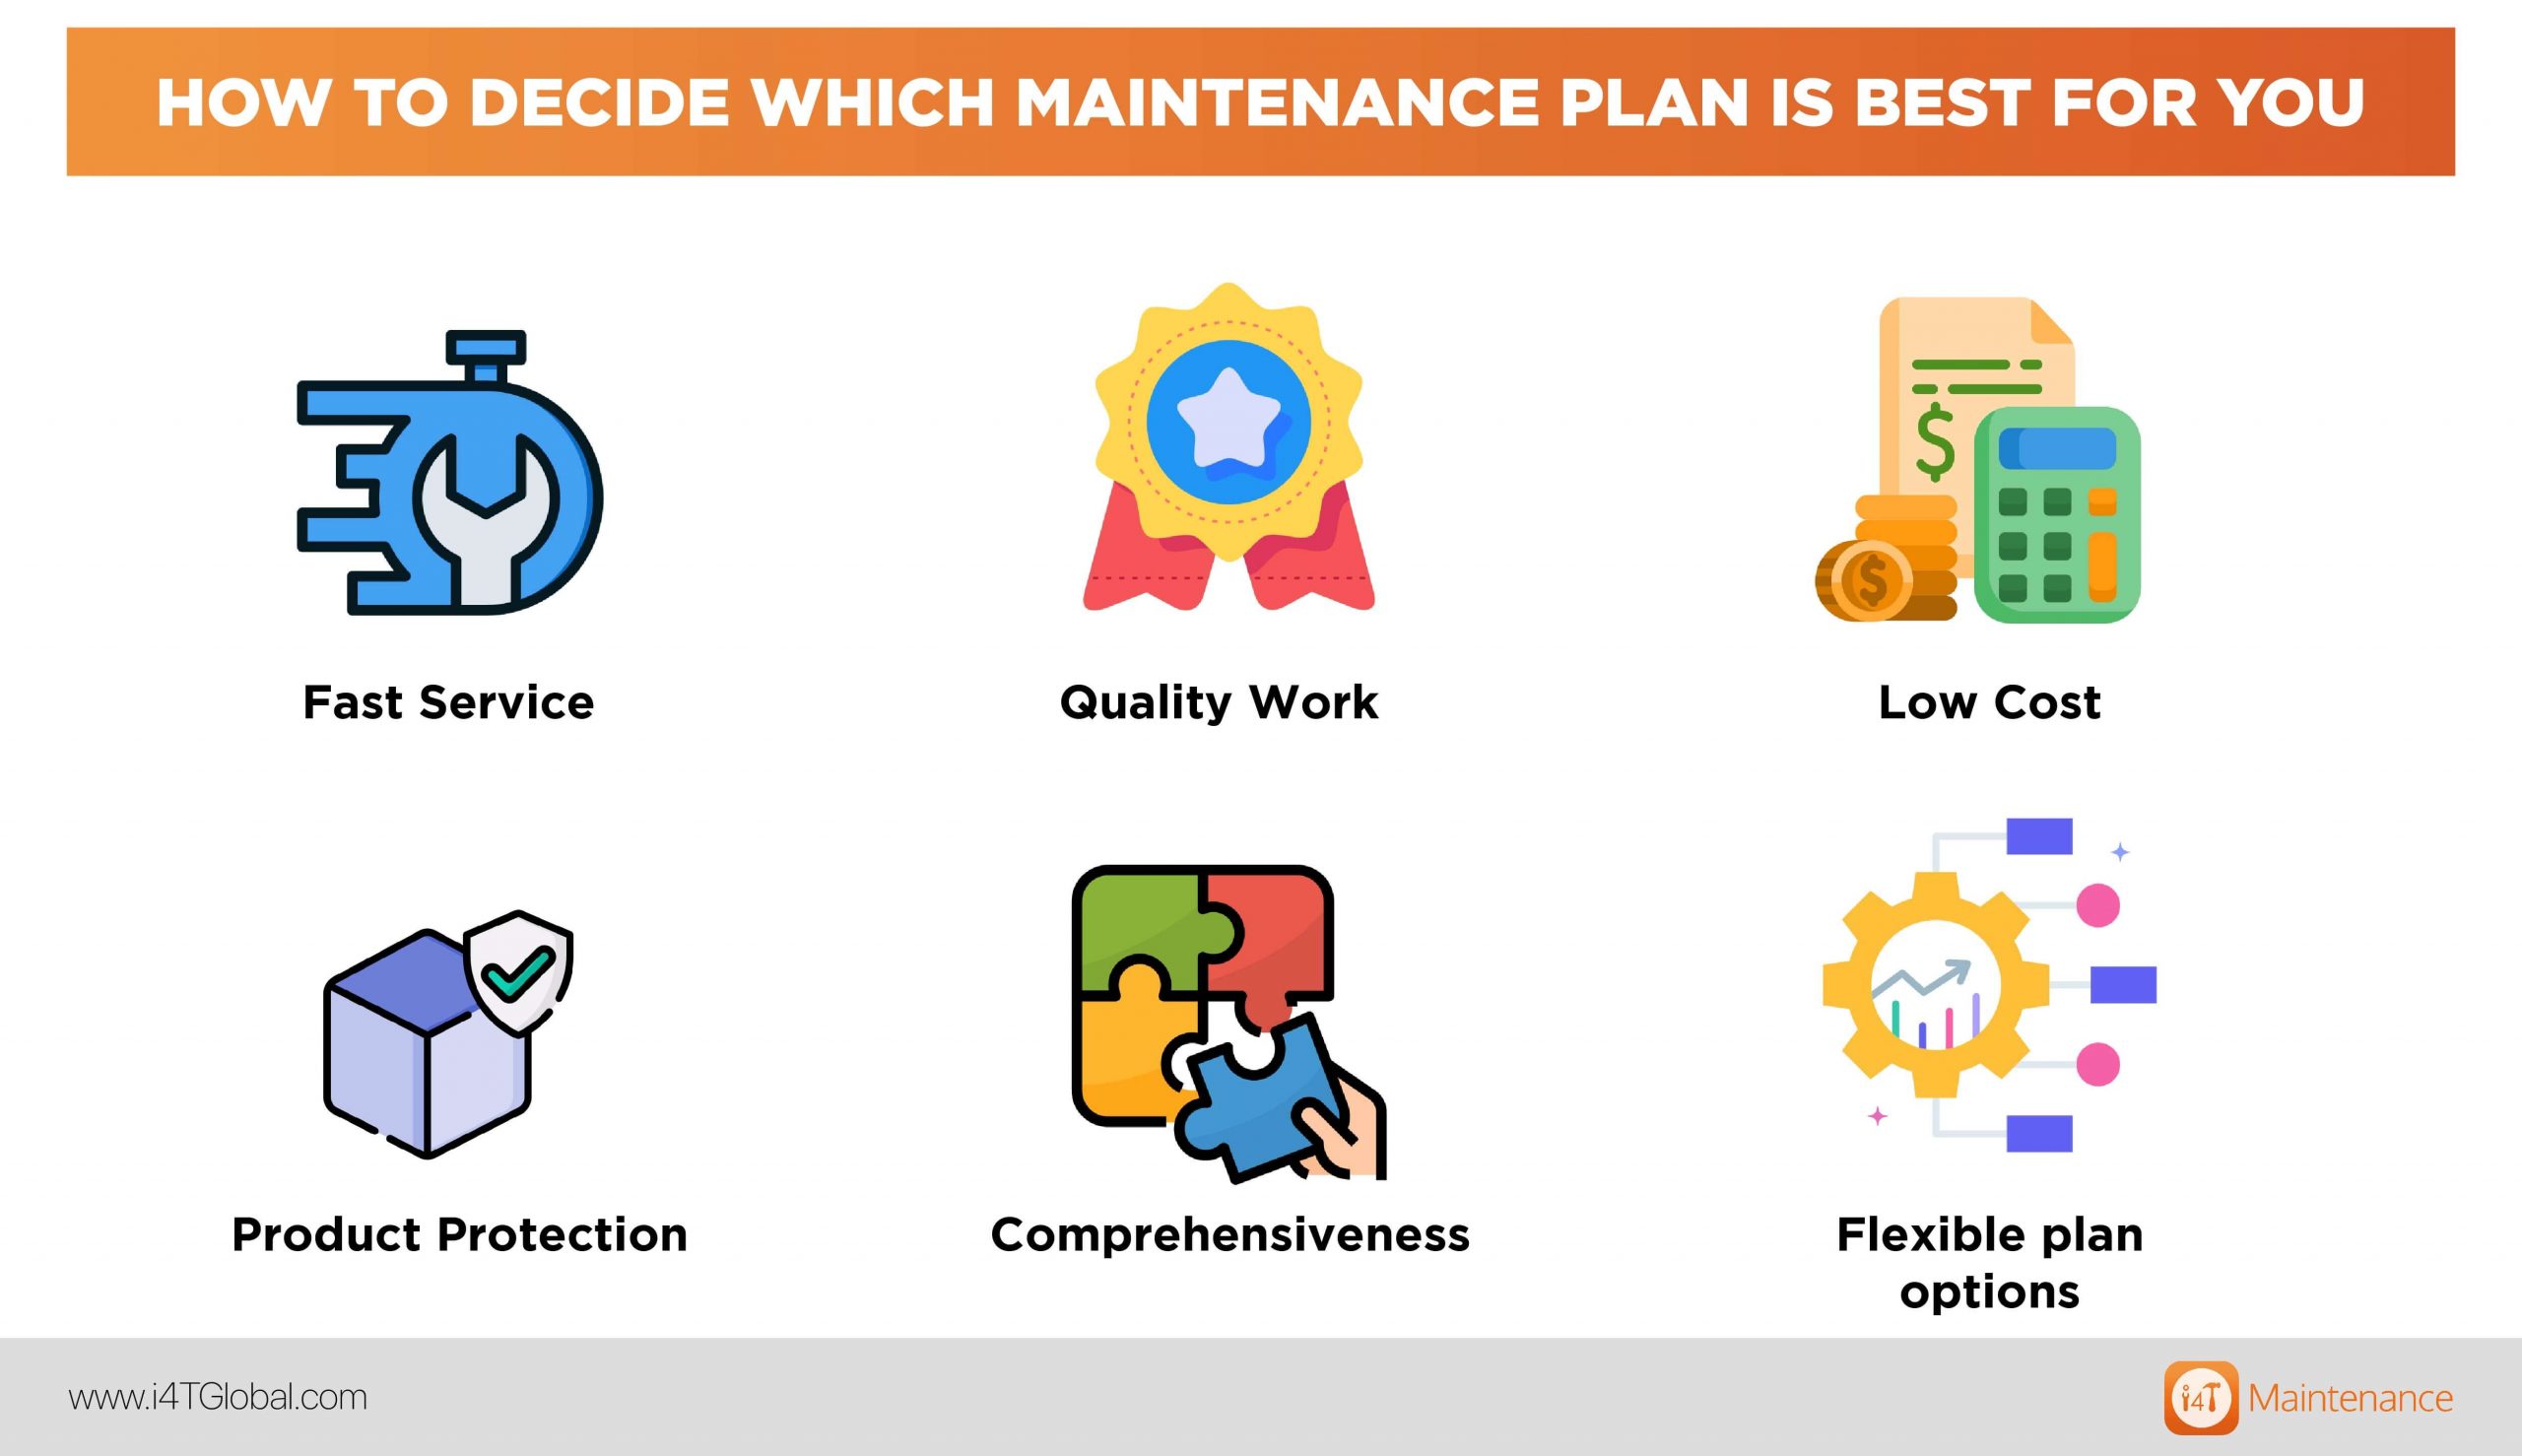 How to decide which maintenace plan is best for you - i4T Global